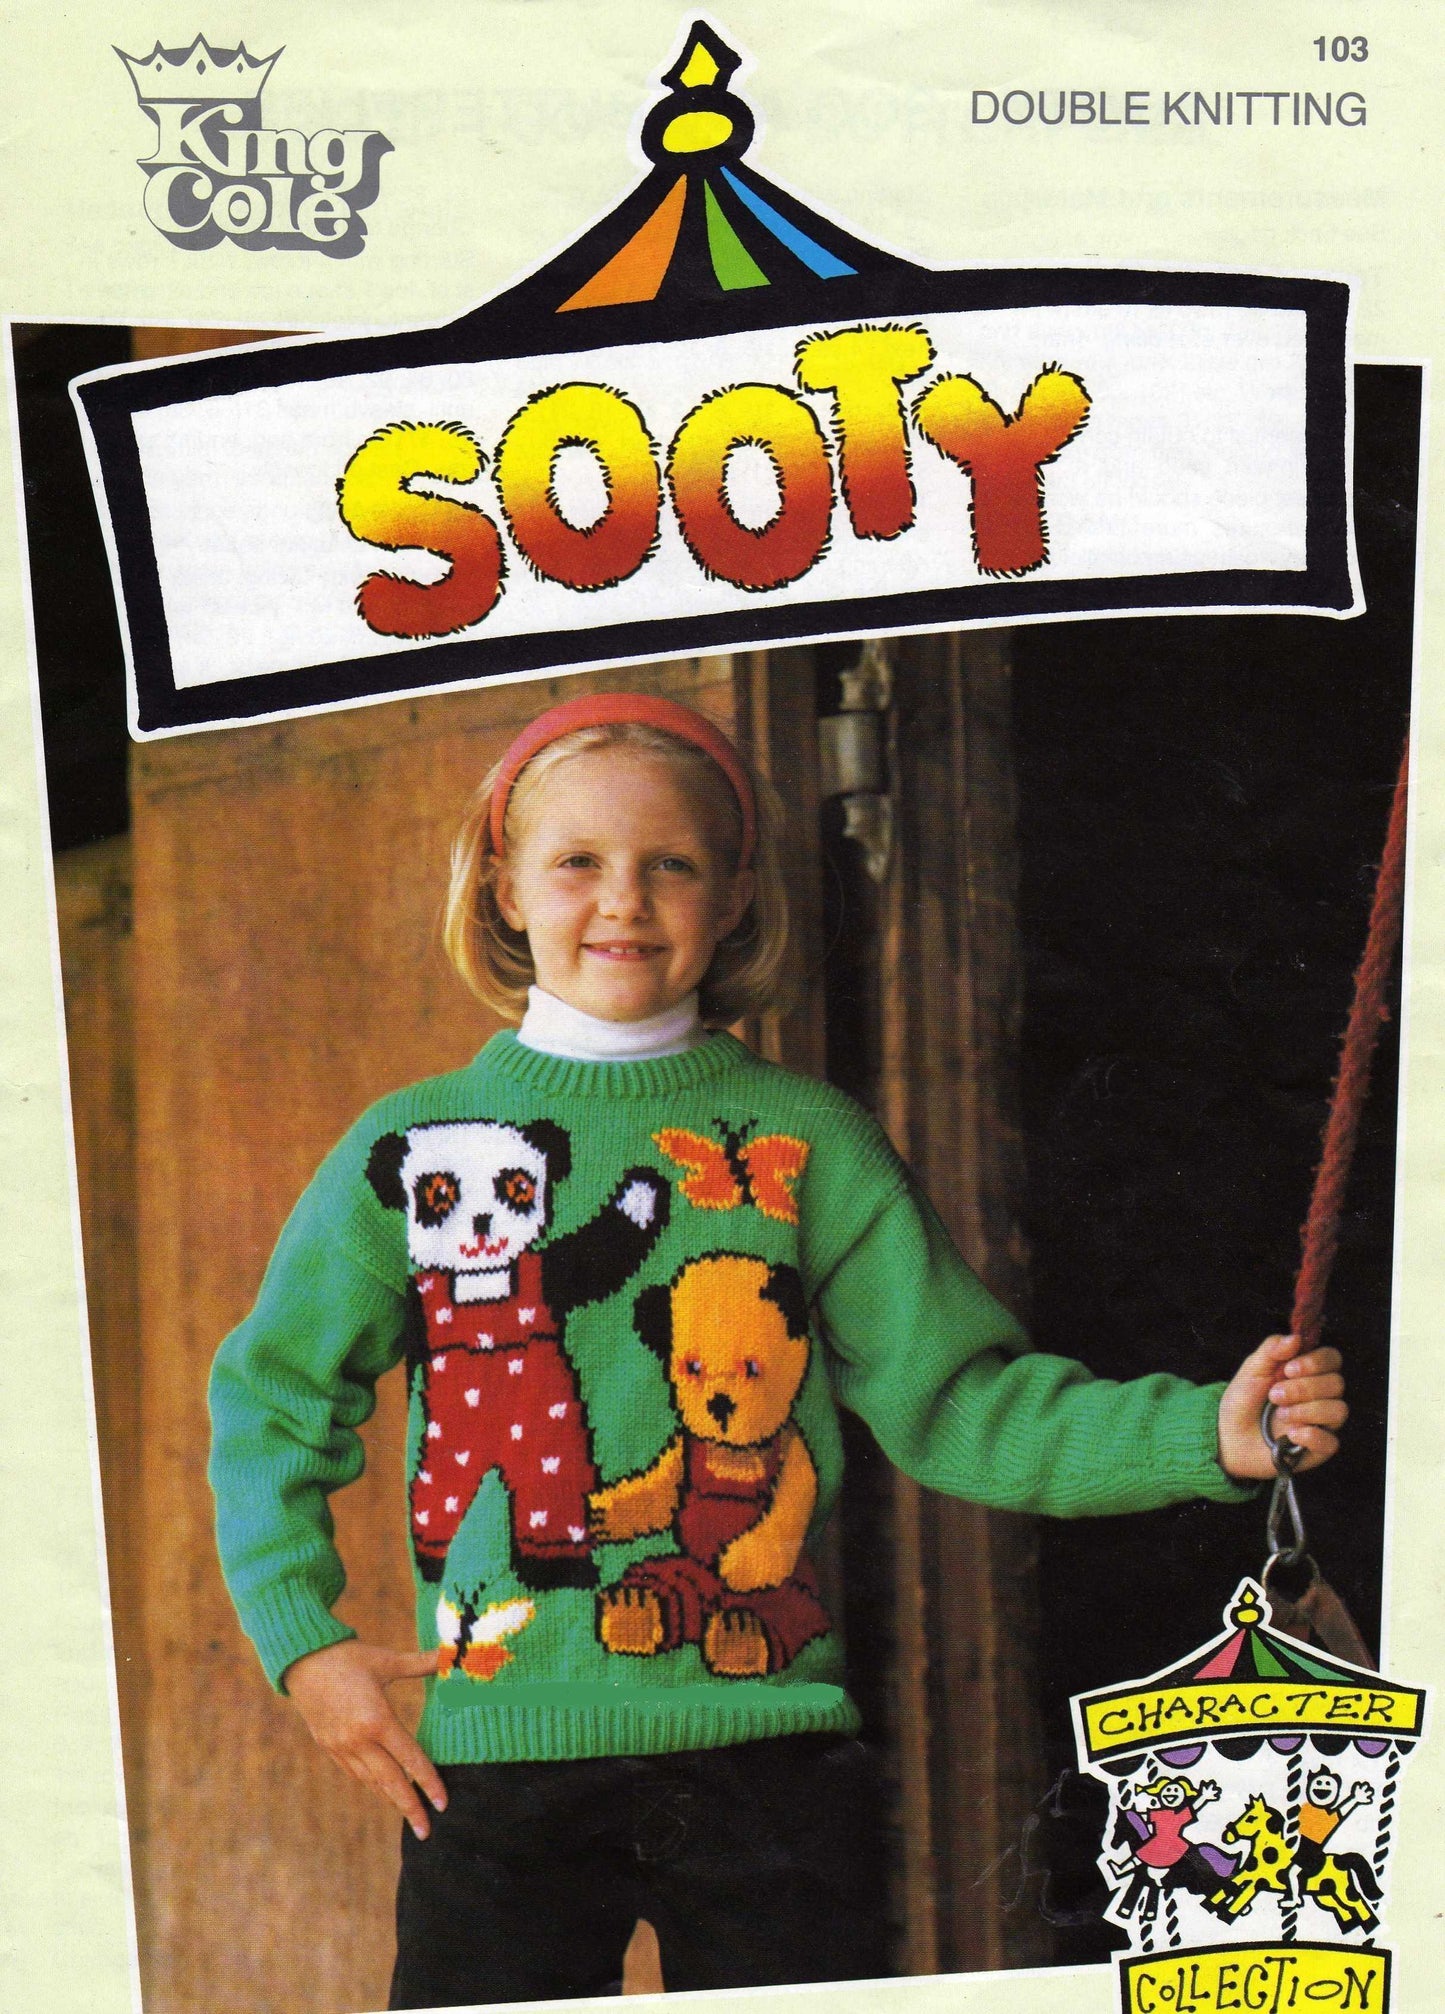  Sooty and Soo Jumper Knitting Pattern by Cross Stitch Chart Heaven sold by Free Spirit Accessories